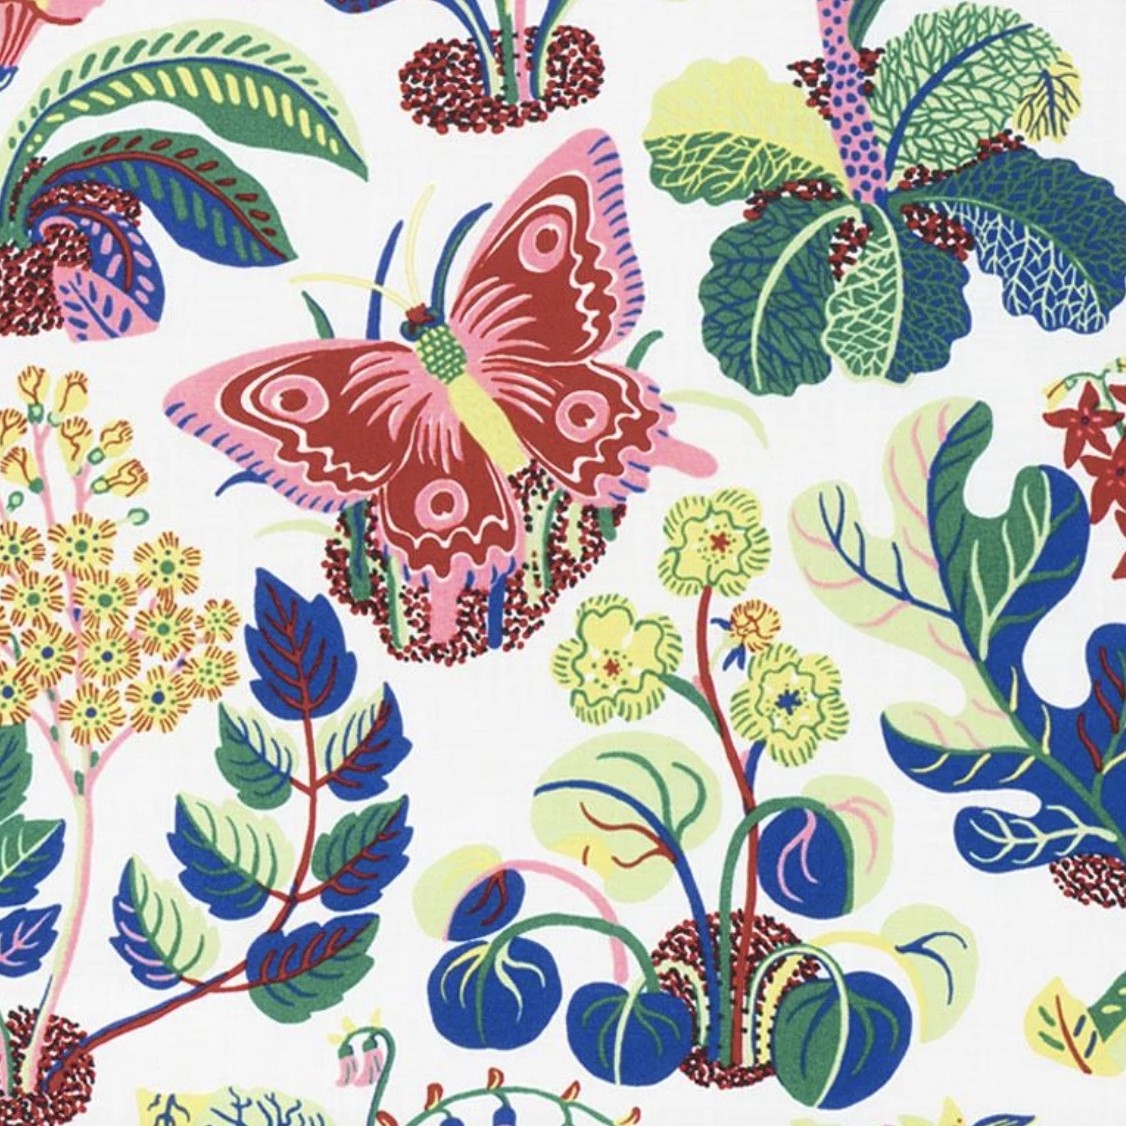 The image of an Exotic Butterfly Indoor/Outdoor Fabric product